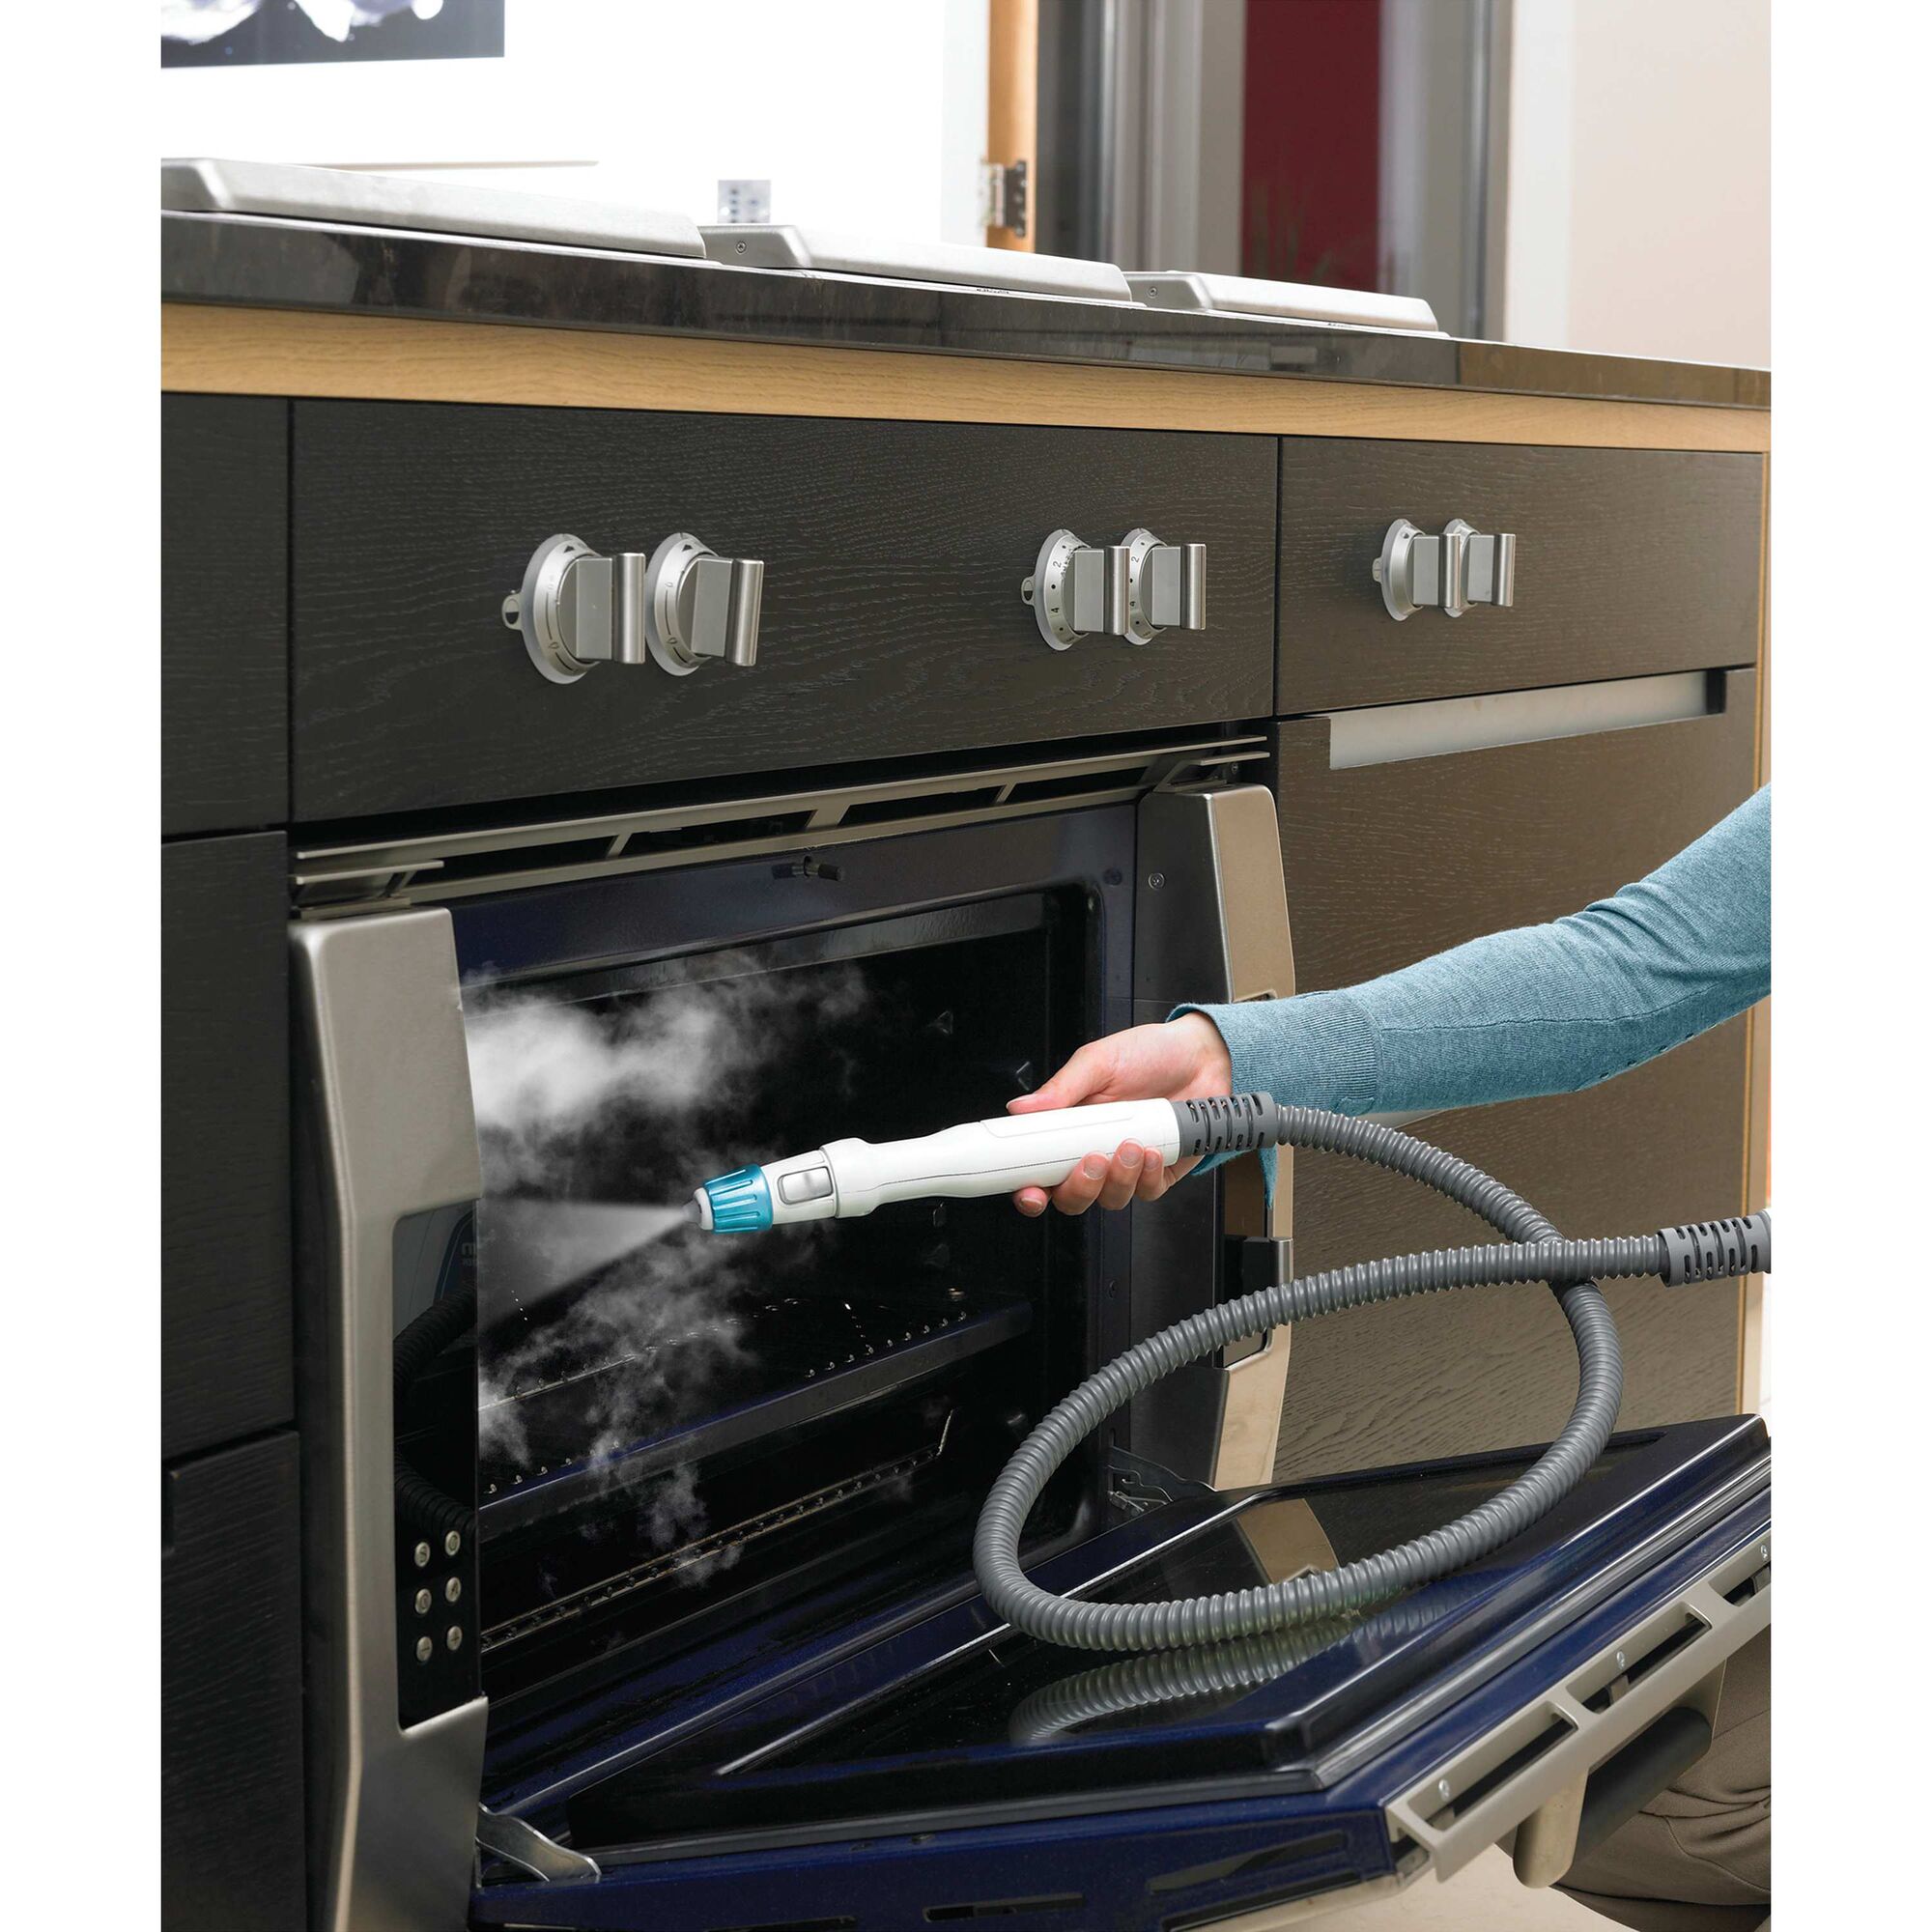 8 in 1 complete steam cleaning system being used to clean kitchen oven.